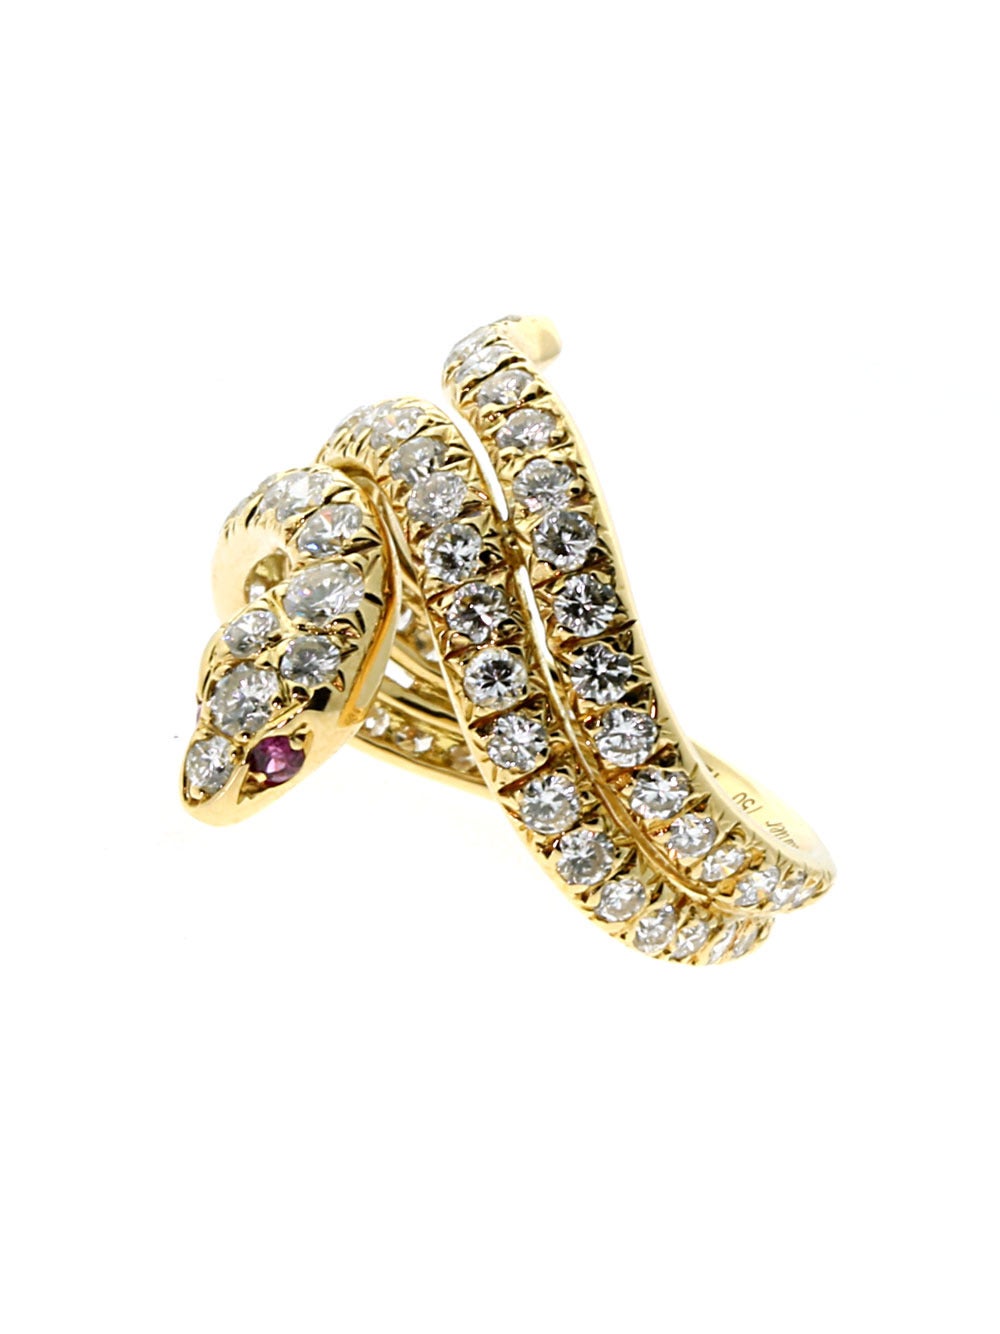 A chic Cartier ring featuring an alluring snake design paved with the finest Cartier round brilliant cut diamonds set in 18k yellow gold. 

Size:  US 5
Measurements: .82″ Inches wide

Inventory ID: 0000142